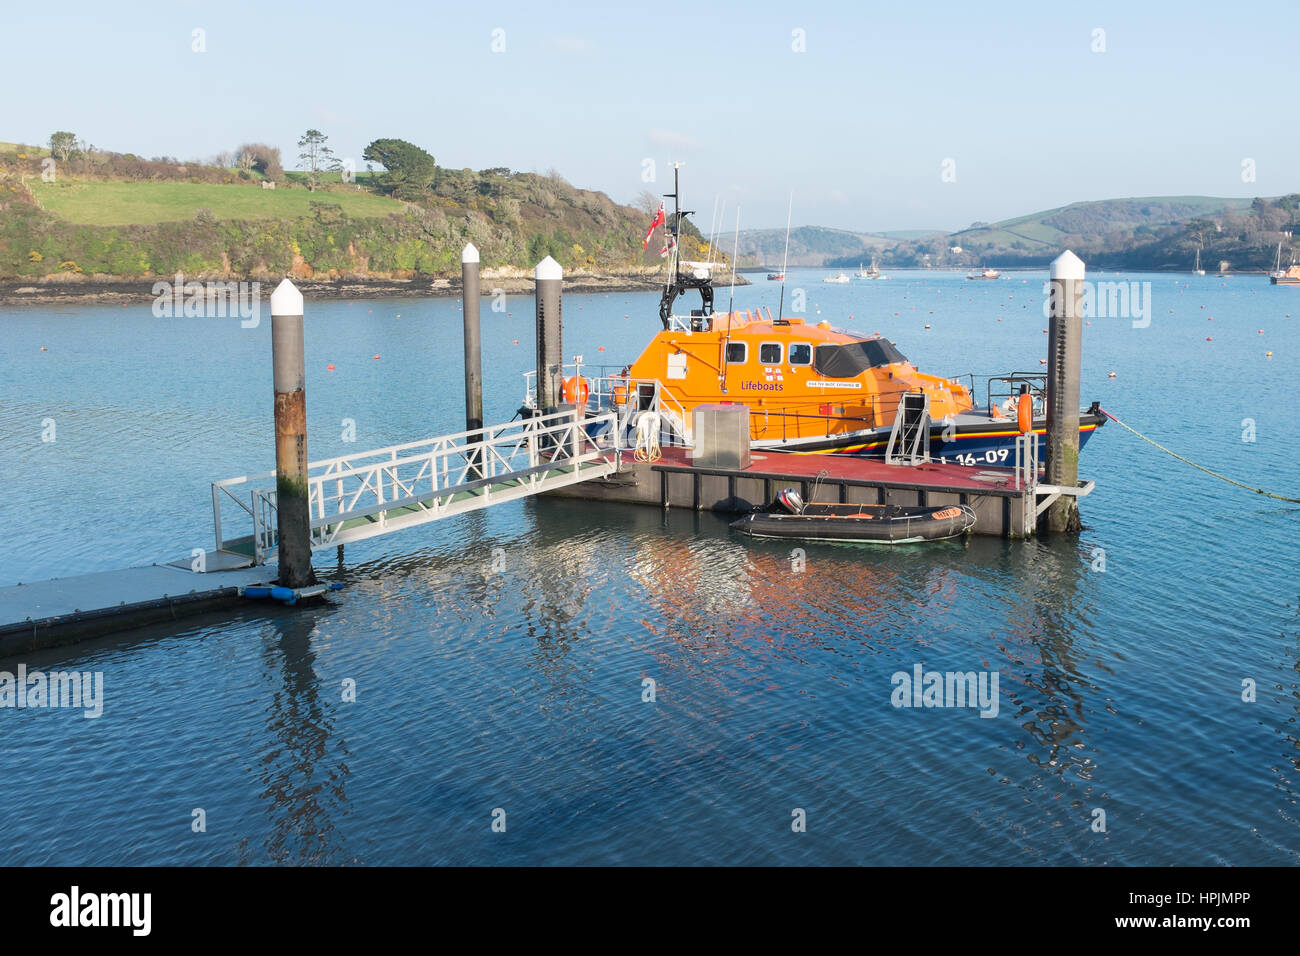 Salcombe All Weather Lifeboat, Baltic Exchange lll, on its pontoon mooring in Salcombe Stock Photo